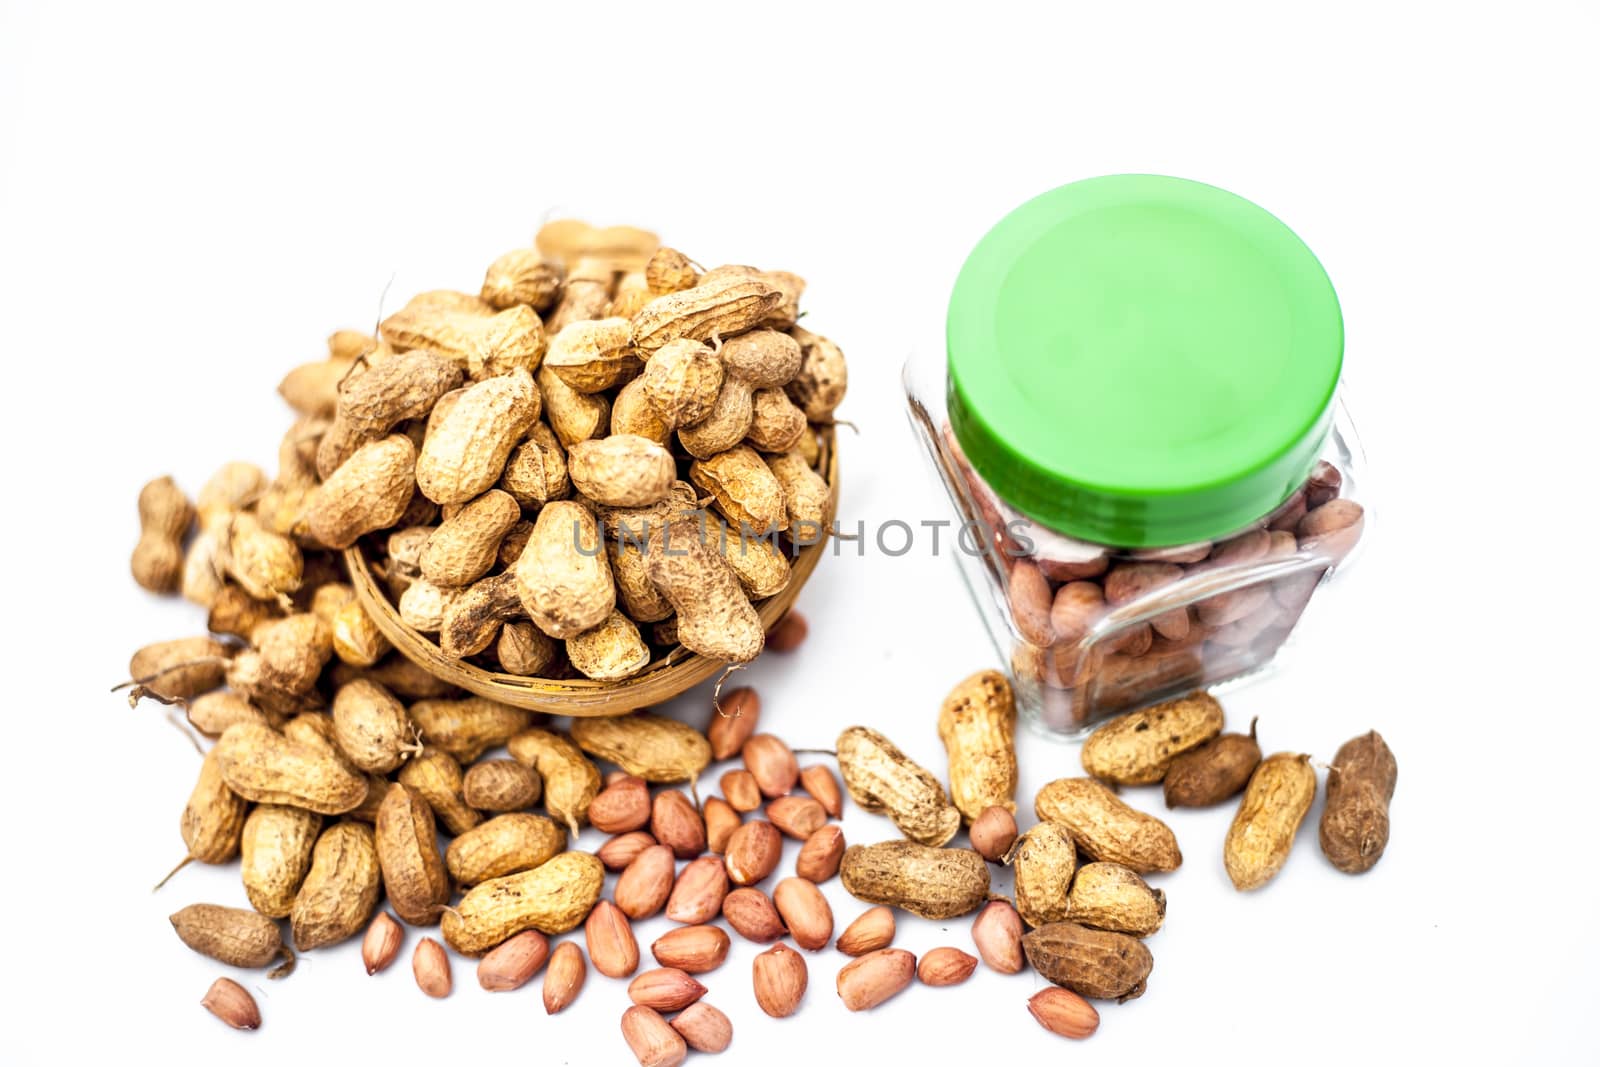 Close up of raw peanuts or groundnut isolated on white with some peeled in a separate bottle. by mirzamlk